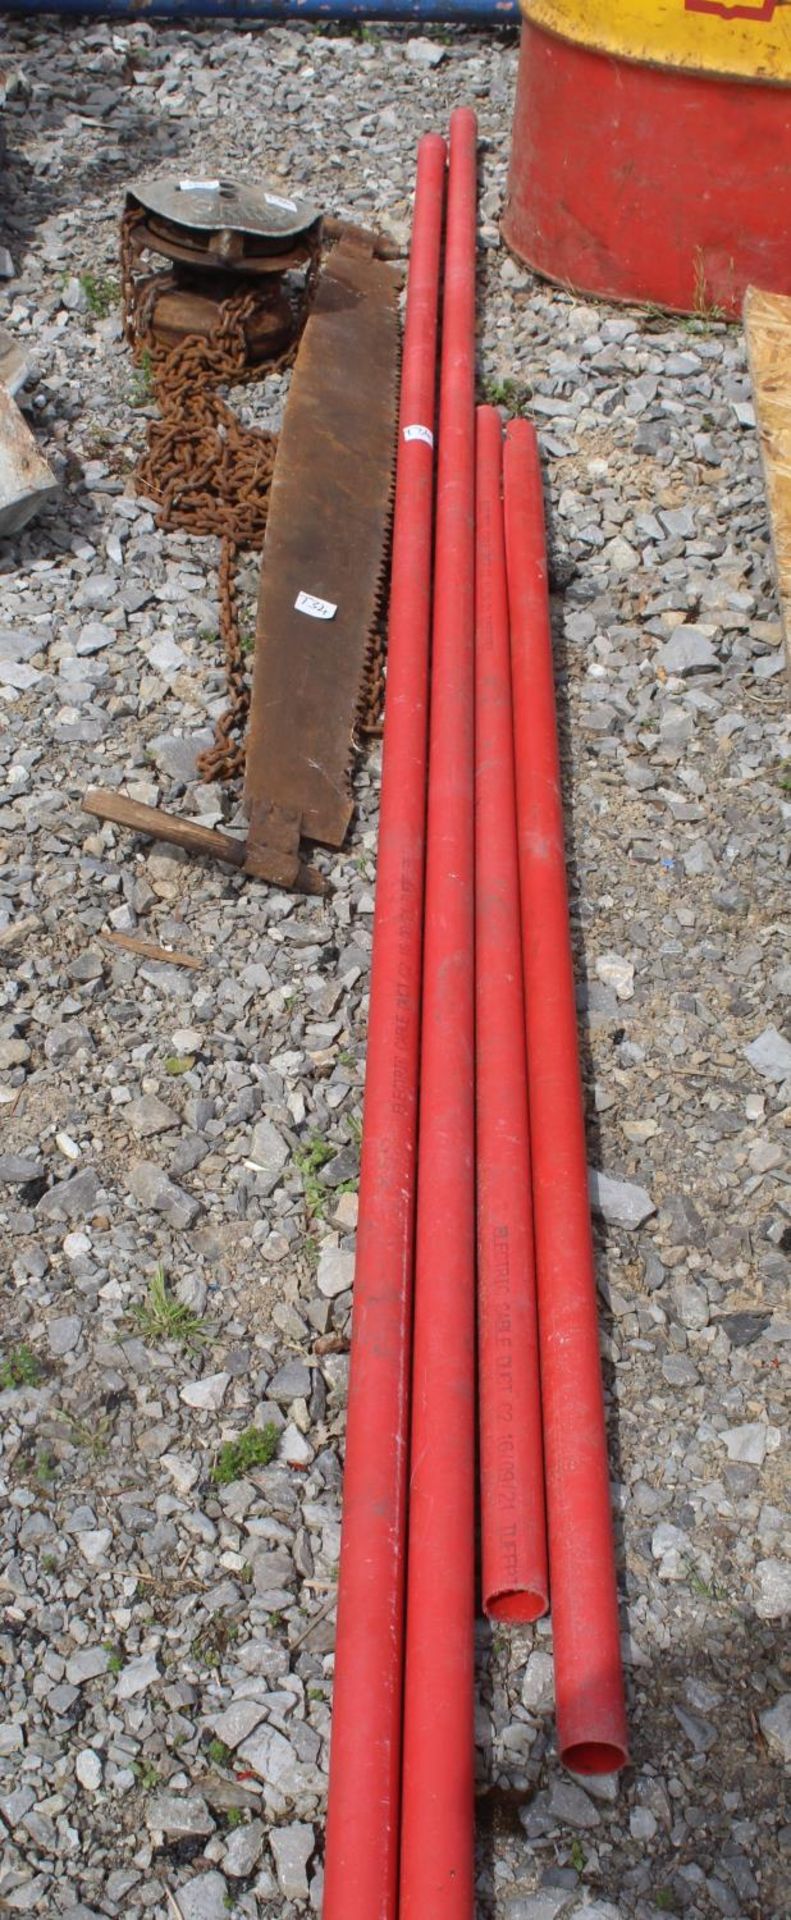 "X" CUT SAW, BLOCK & TACKLE&4 RED PIPES + VAT